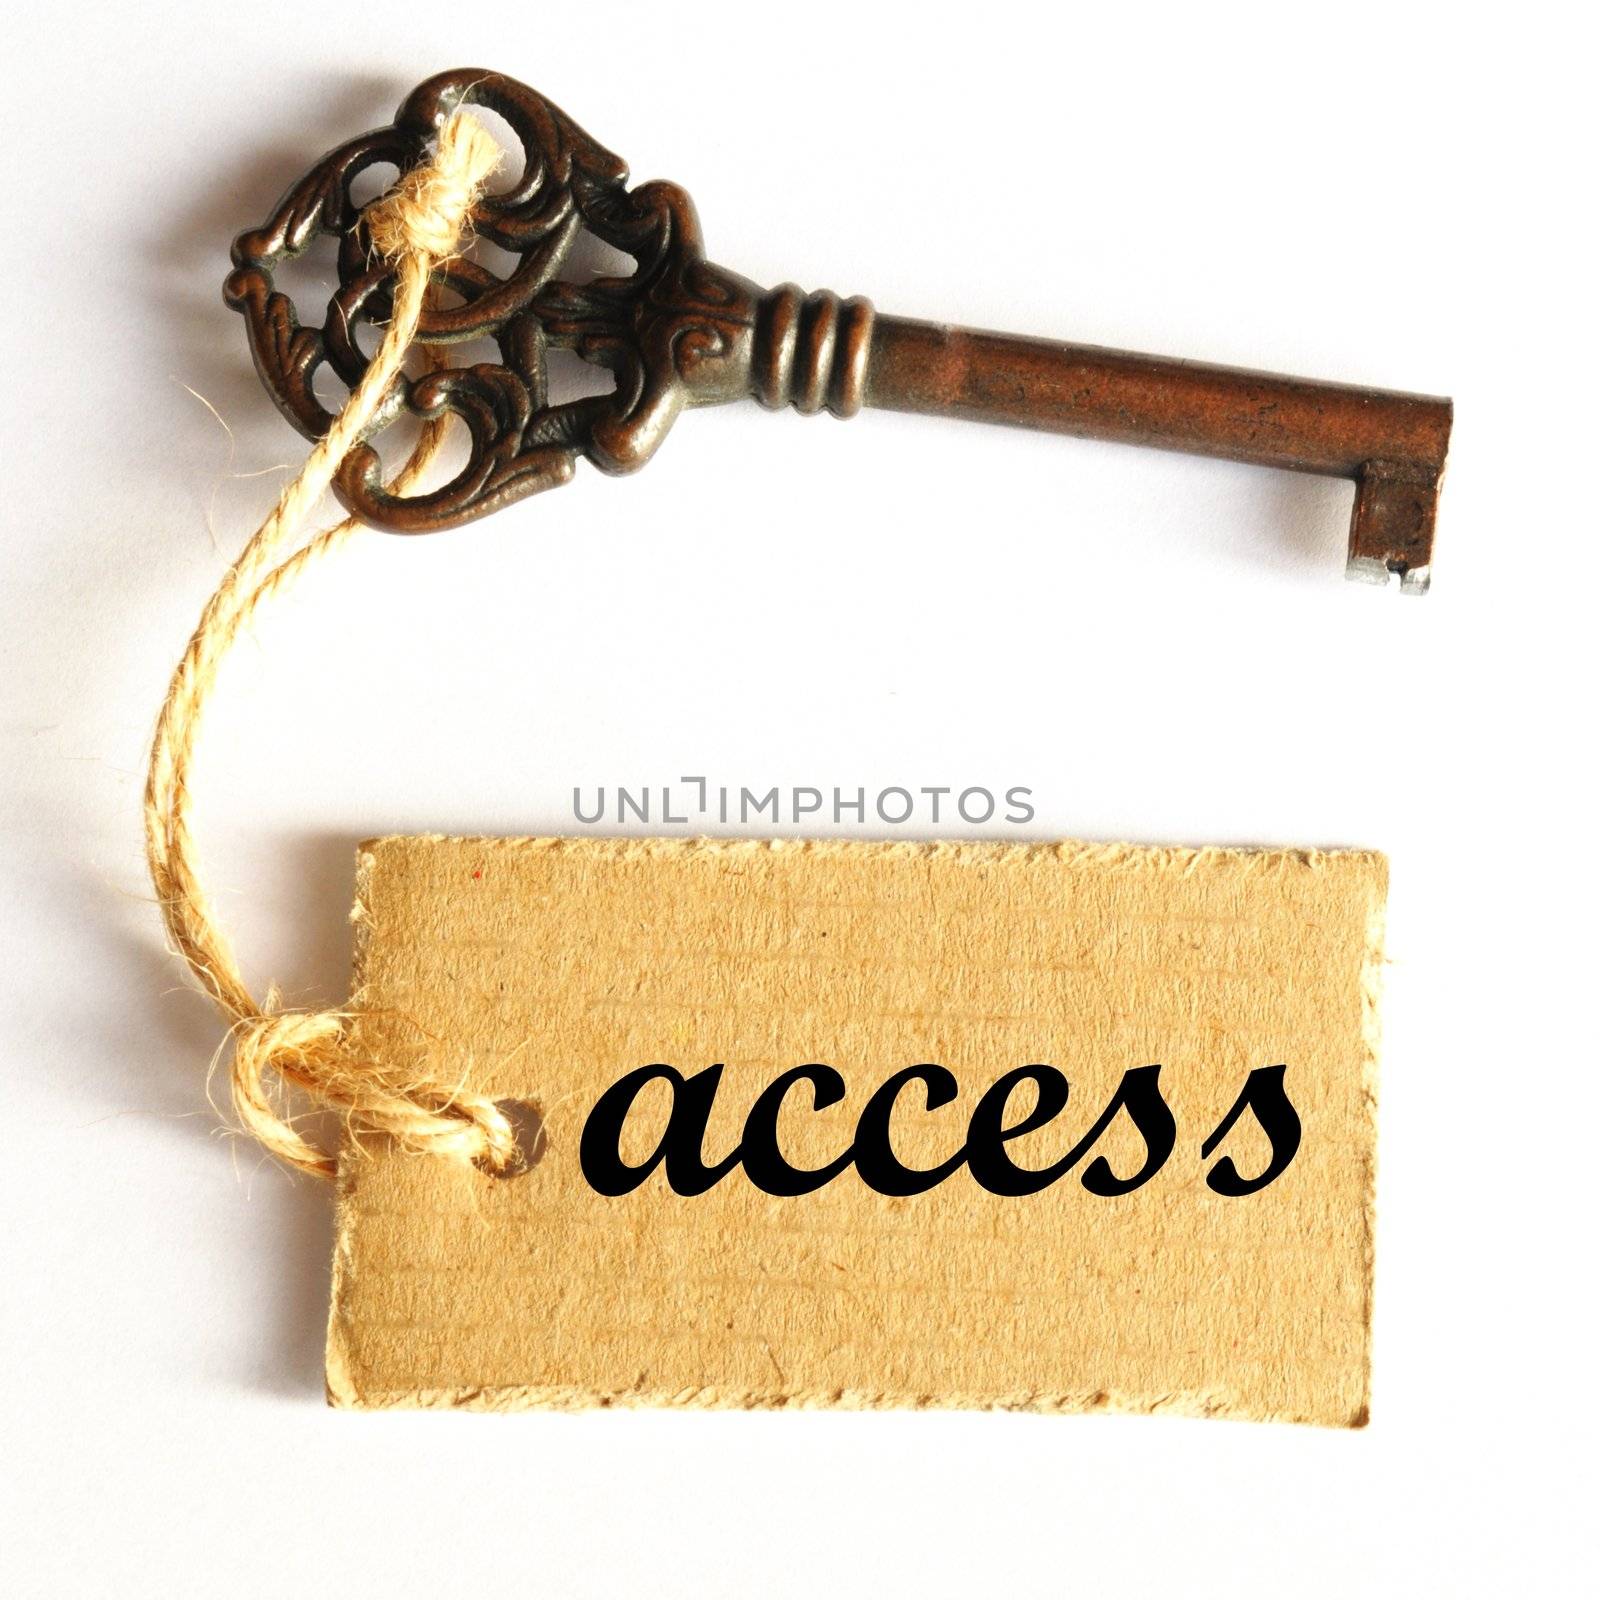 access or login concept with old key